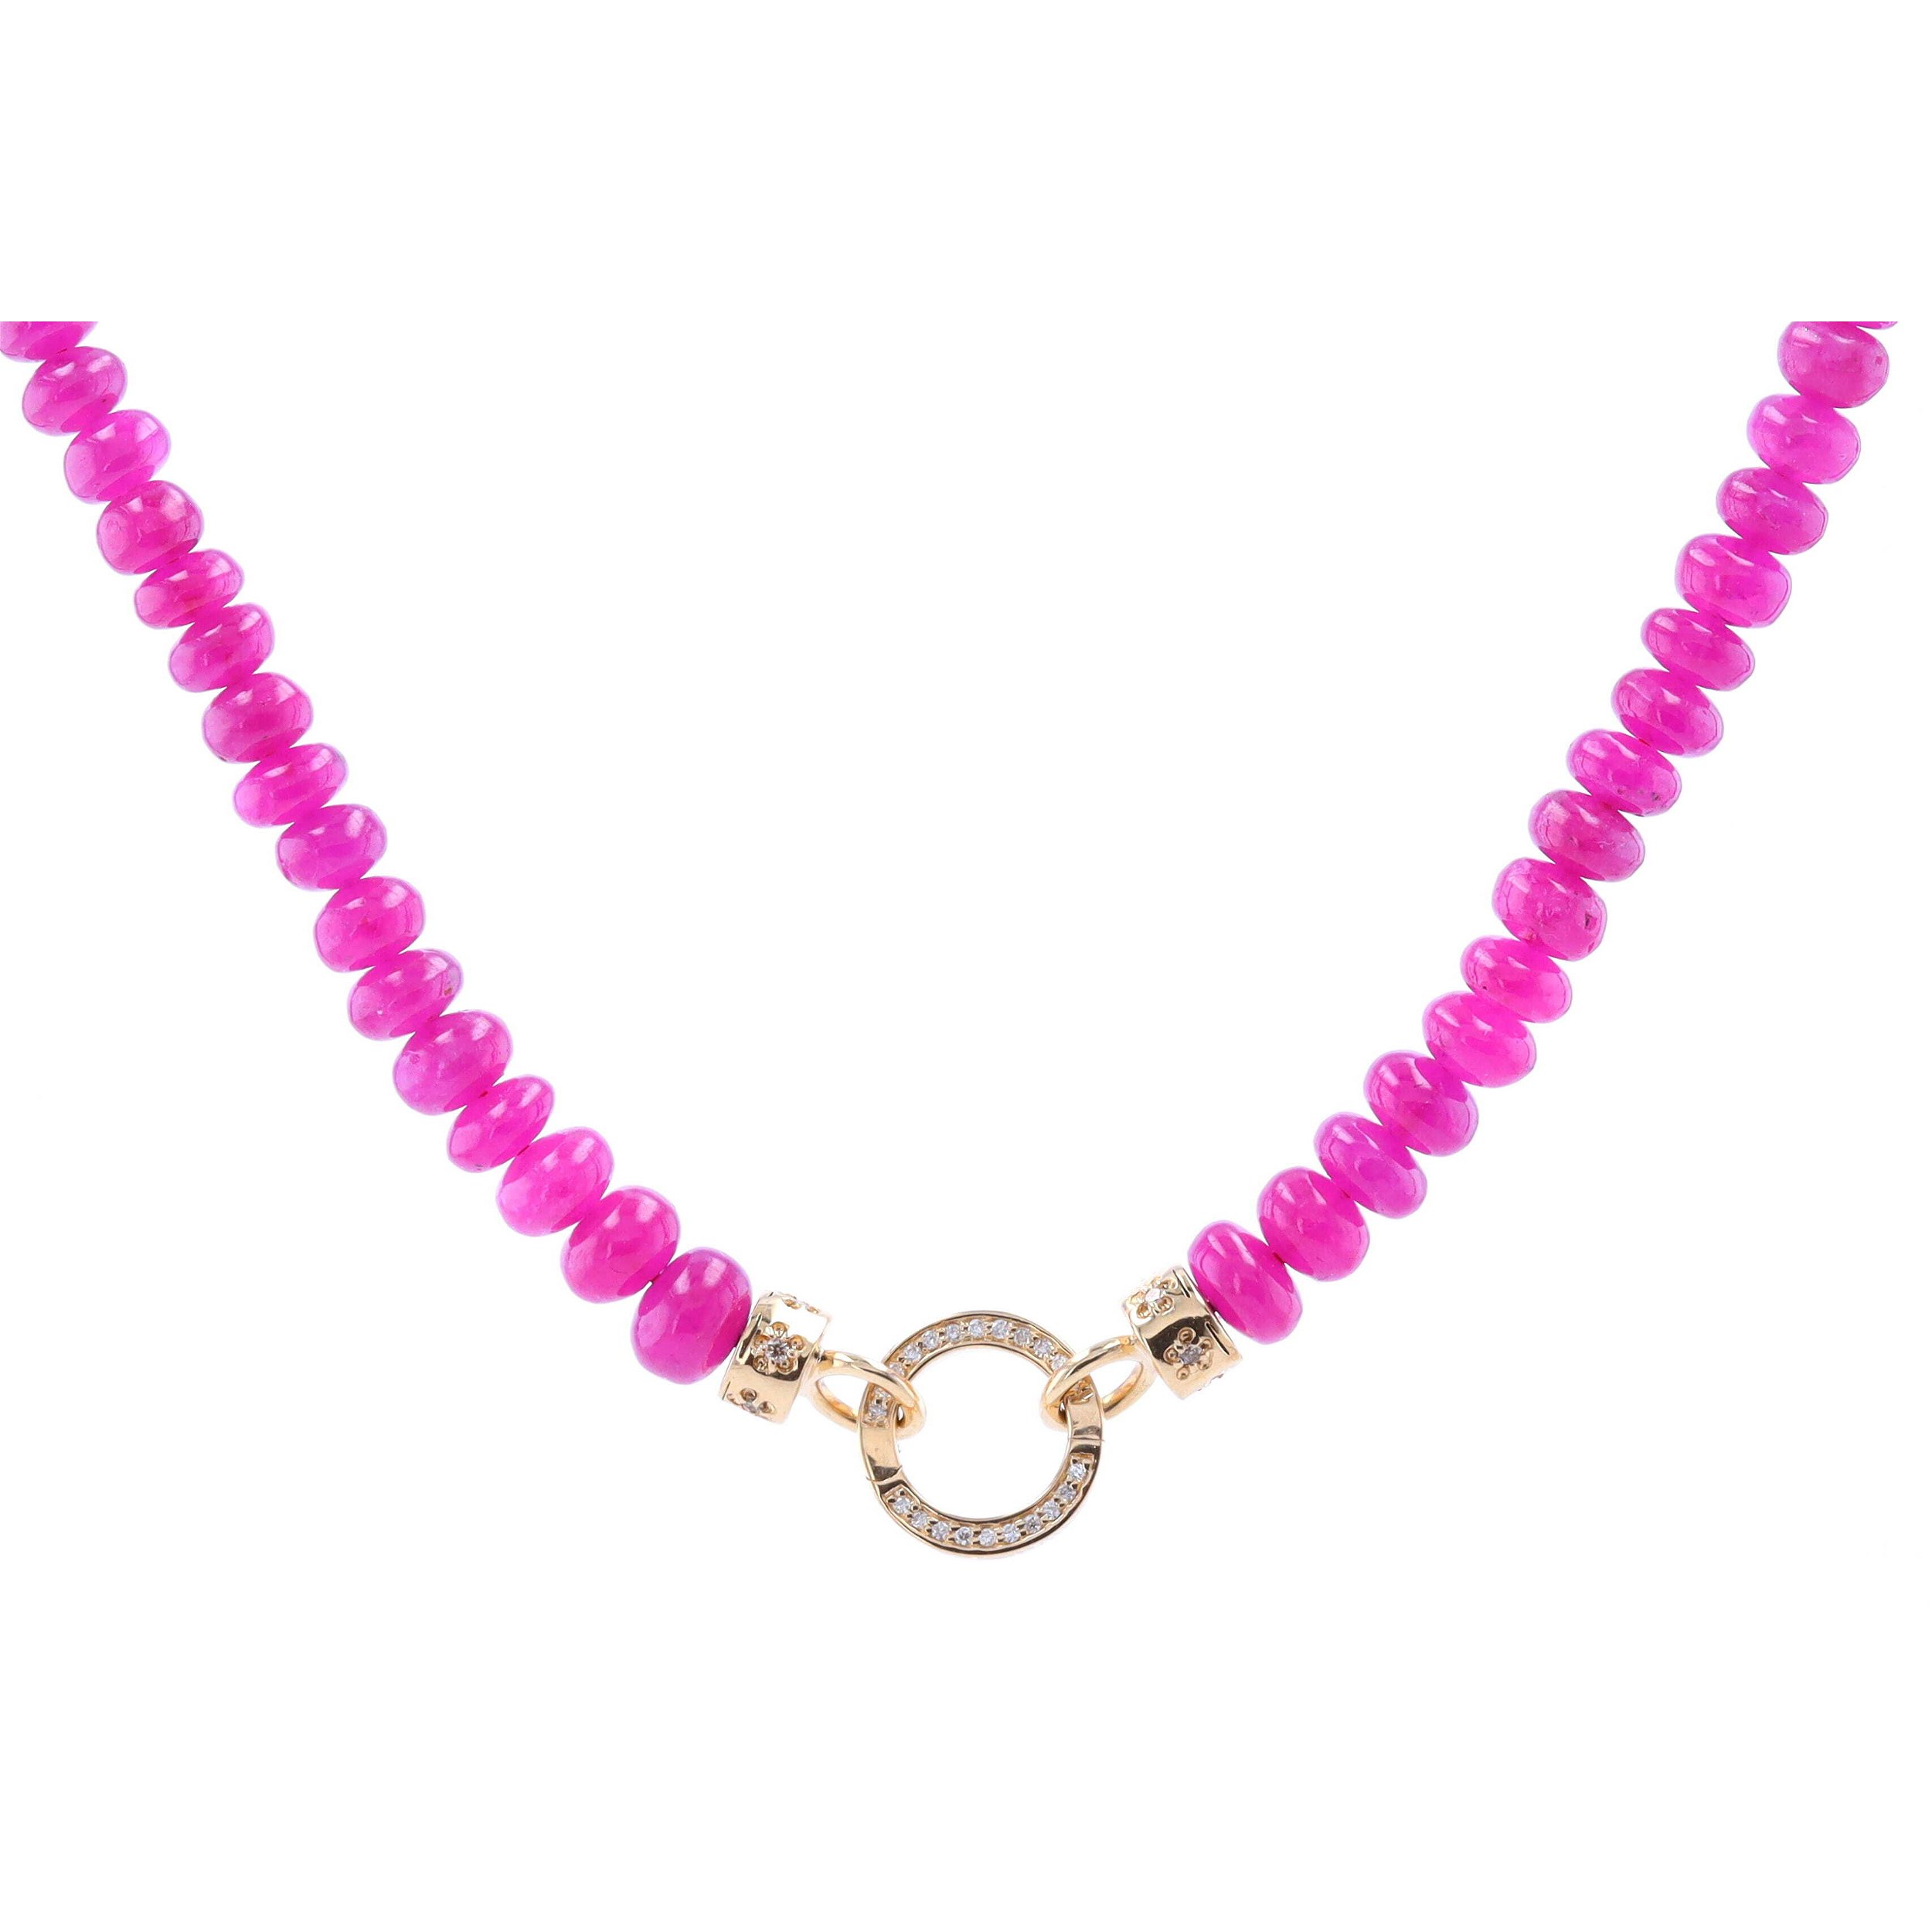 18-20" 4-5mm Hand Polished Pink Tourmaline Beaded Chain With 14k Gold Extension And Gold Caps and Small Circle